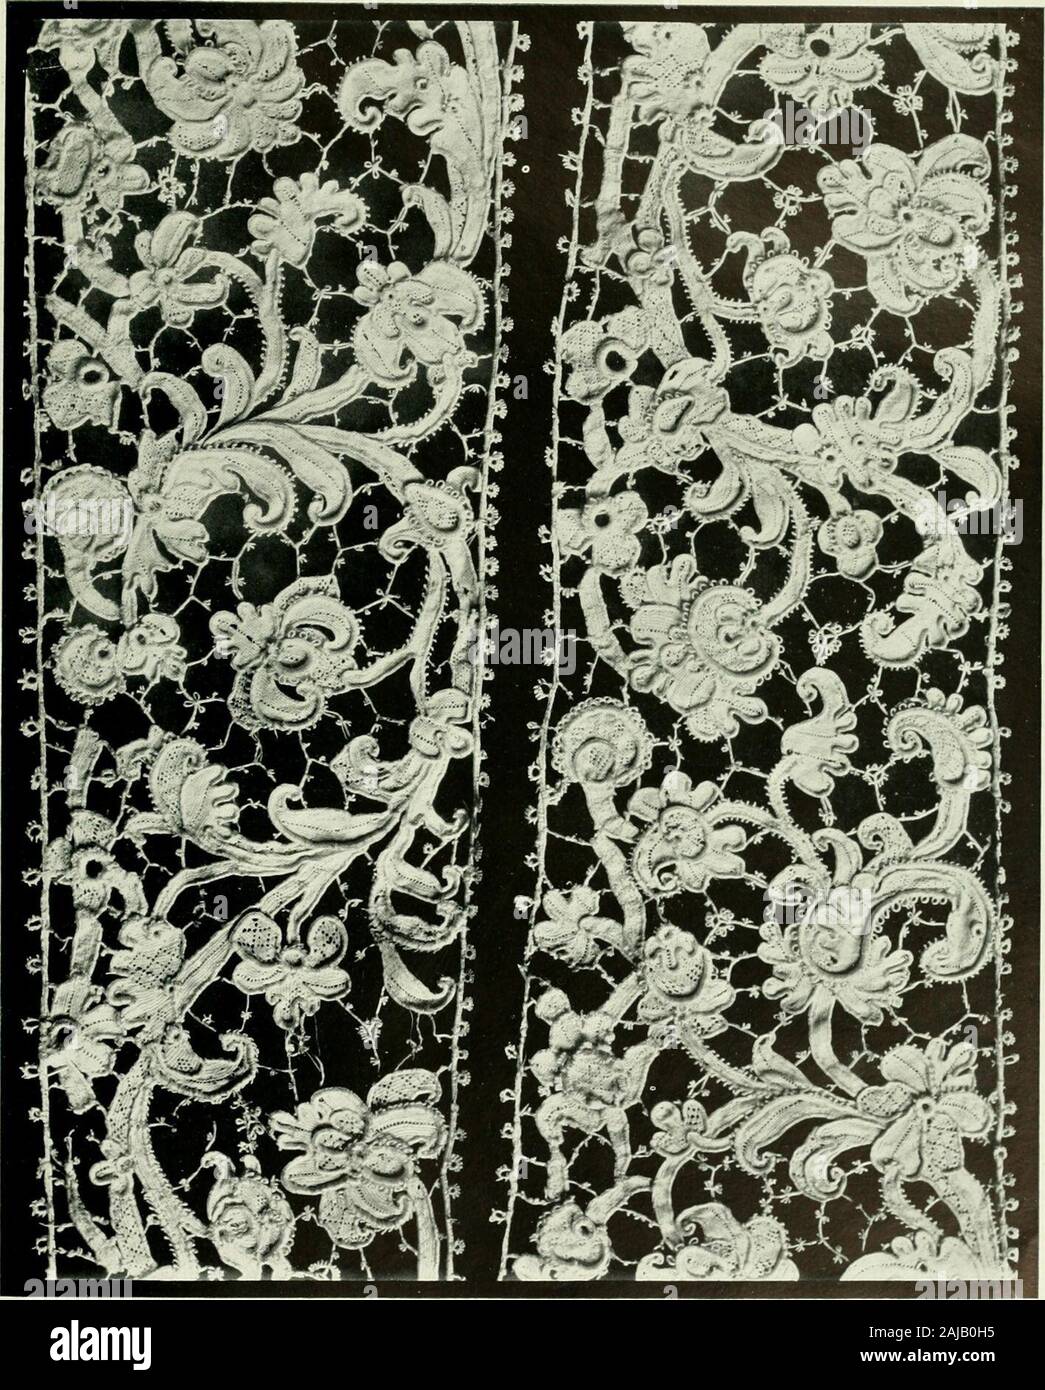 Seven centuries of lace . Plate XLII. PART OF A DRESS TRIMMING OF VERY FINE  NEEDLE-POINT, CALLED ROSE-PUINT (PUiNTO TAGLIATO A FOLIAMi) The pattern  wrought chiefly in close toilfi consists of scrolls